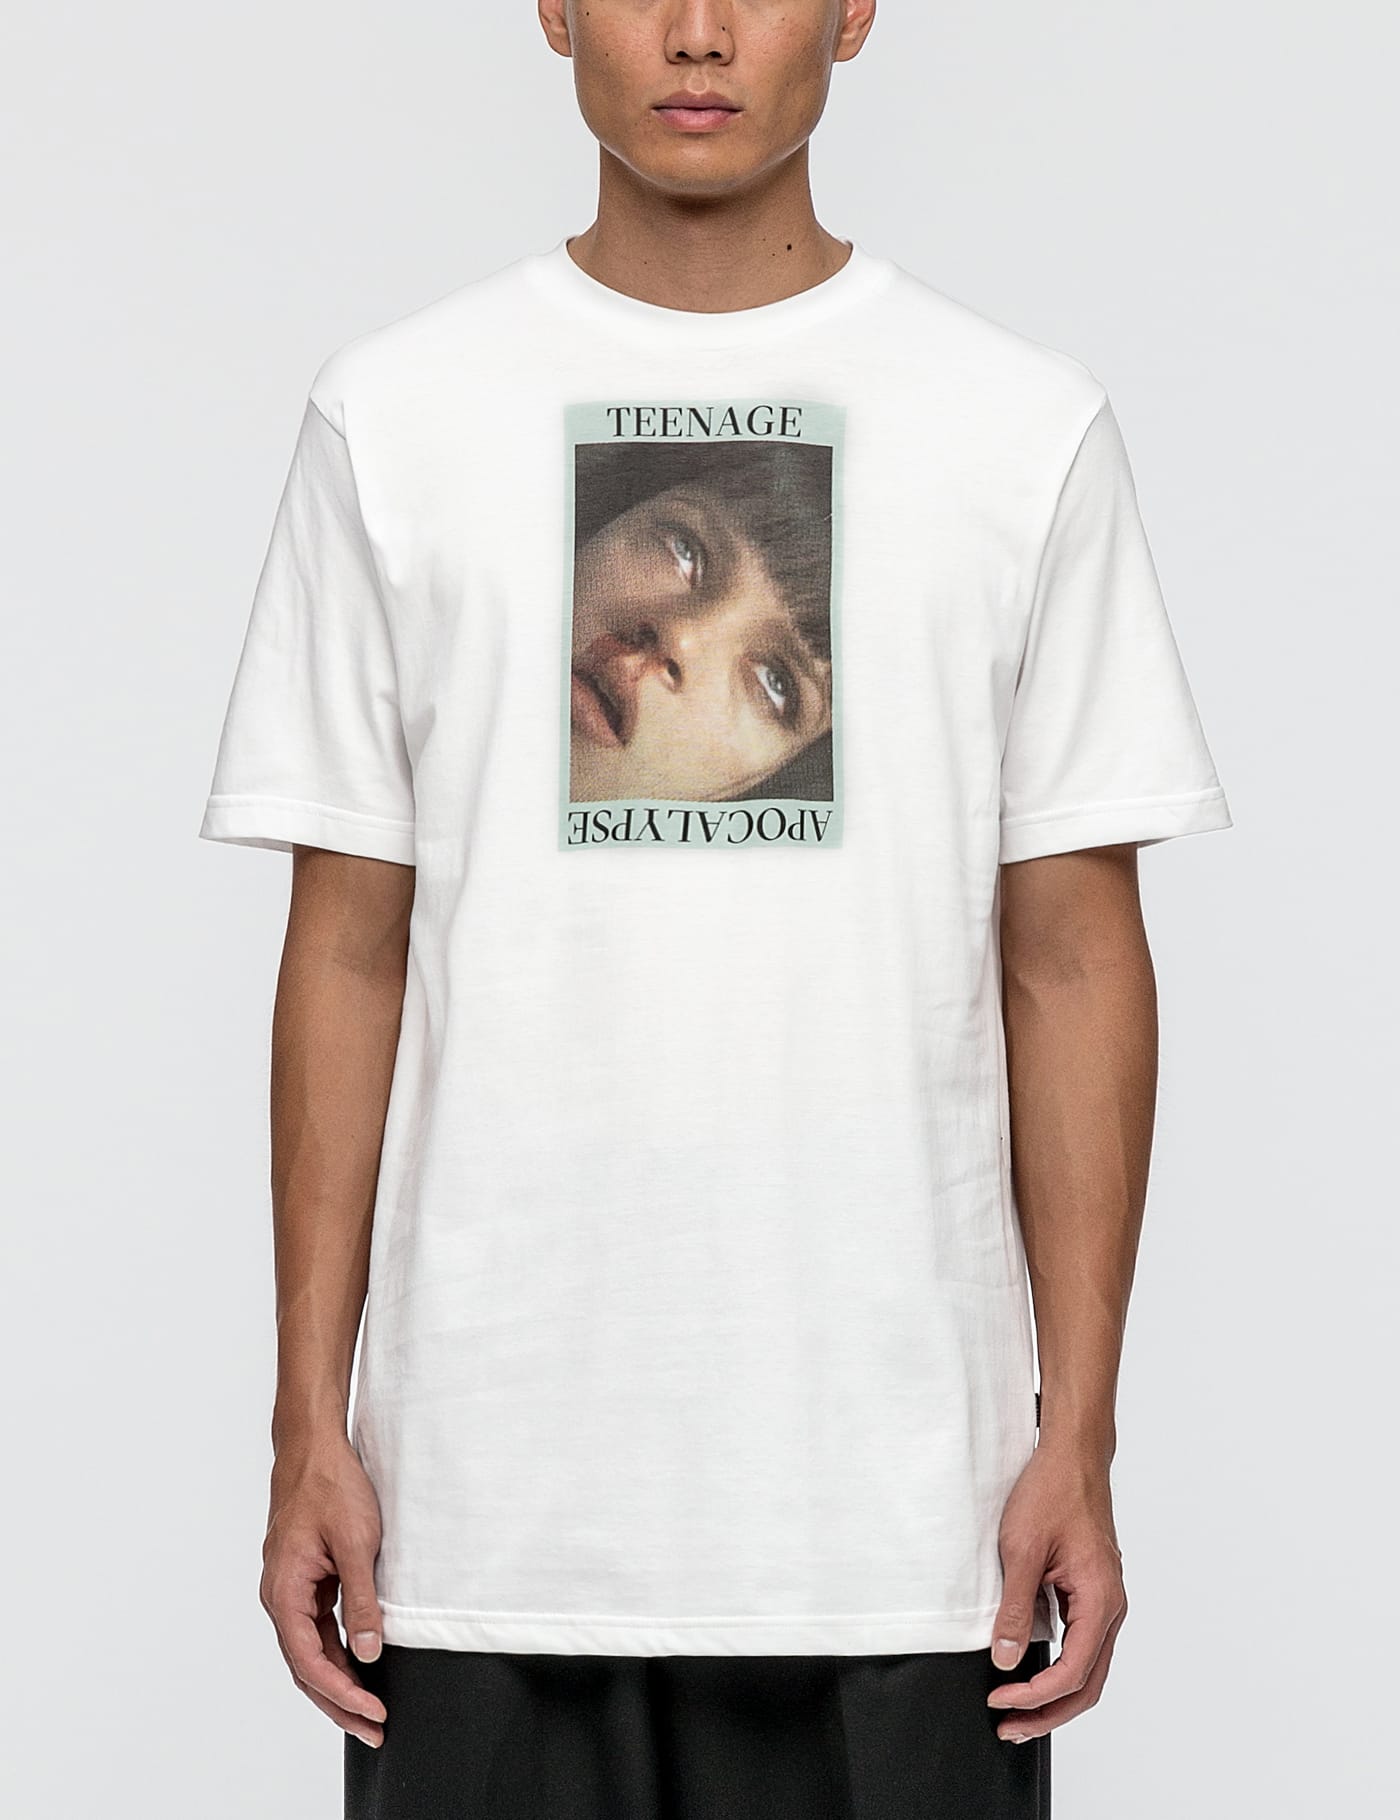 Wasted Paris - Teenage Apocalype T-Shirt | HBX - Globally Curated